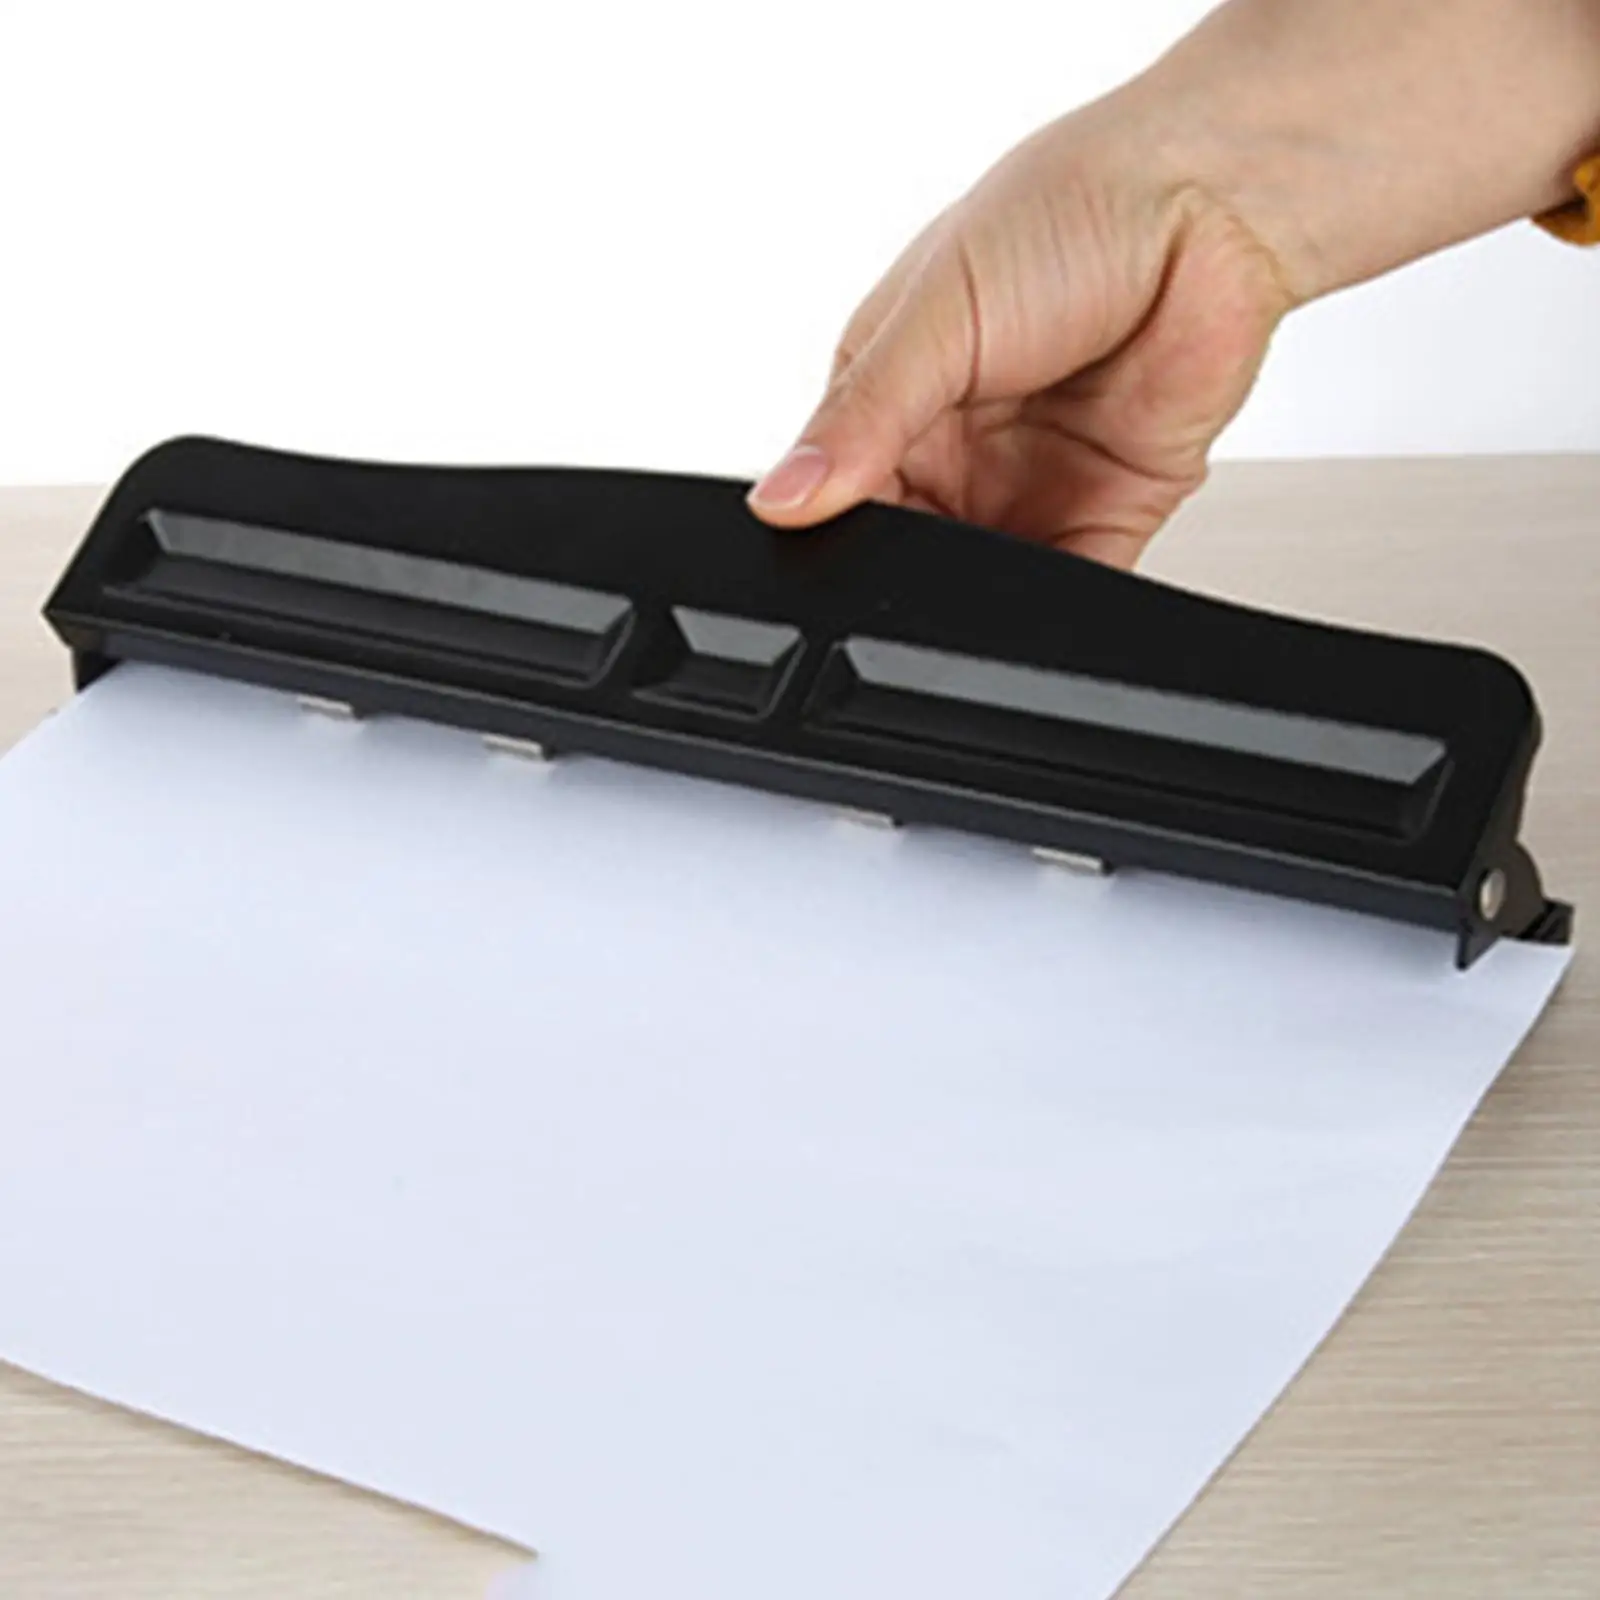 3 Hole Punch 12 Sheet Paper Capacity Heavy Duty File Binding Paper Puncher Desktop Hole Puncher for Classroom Home Working